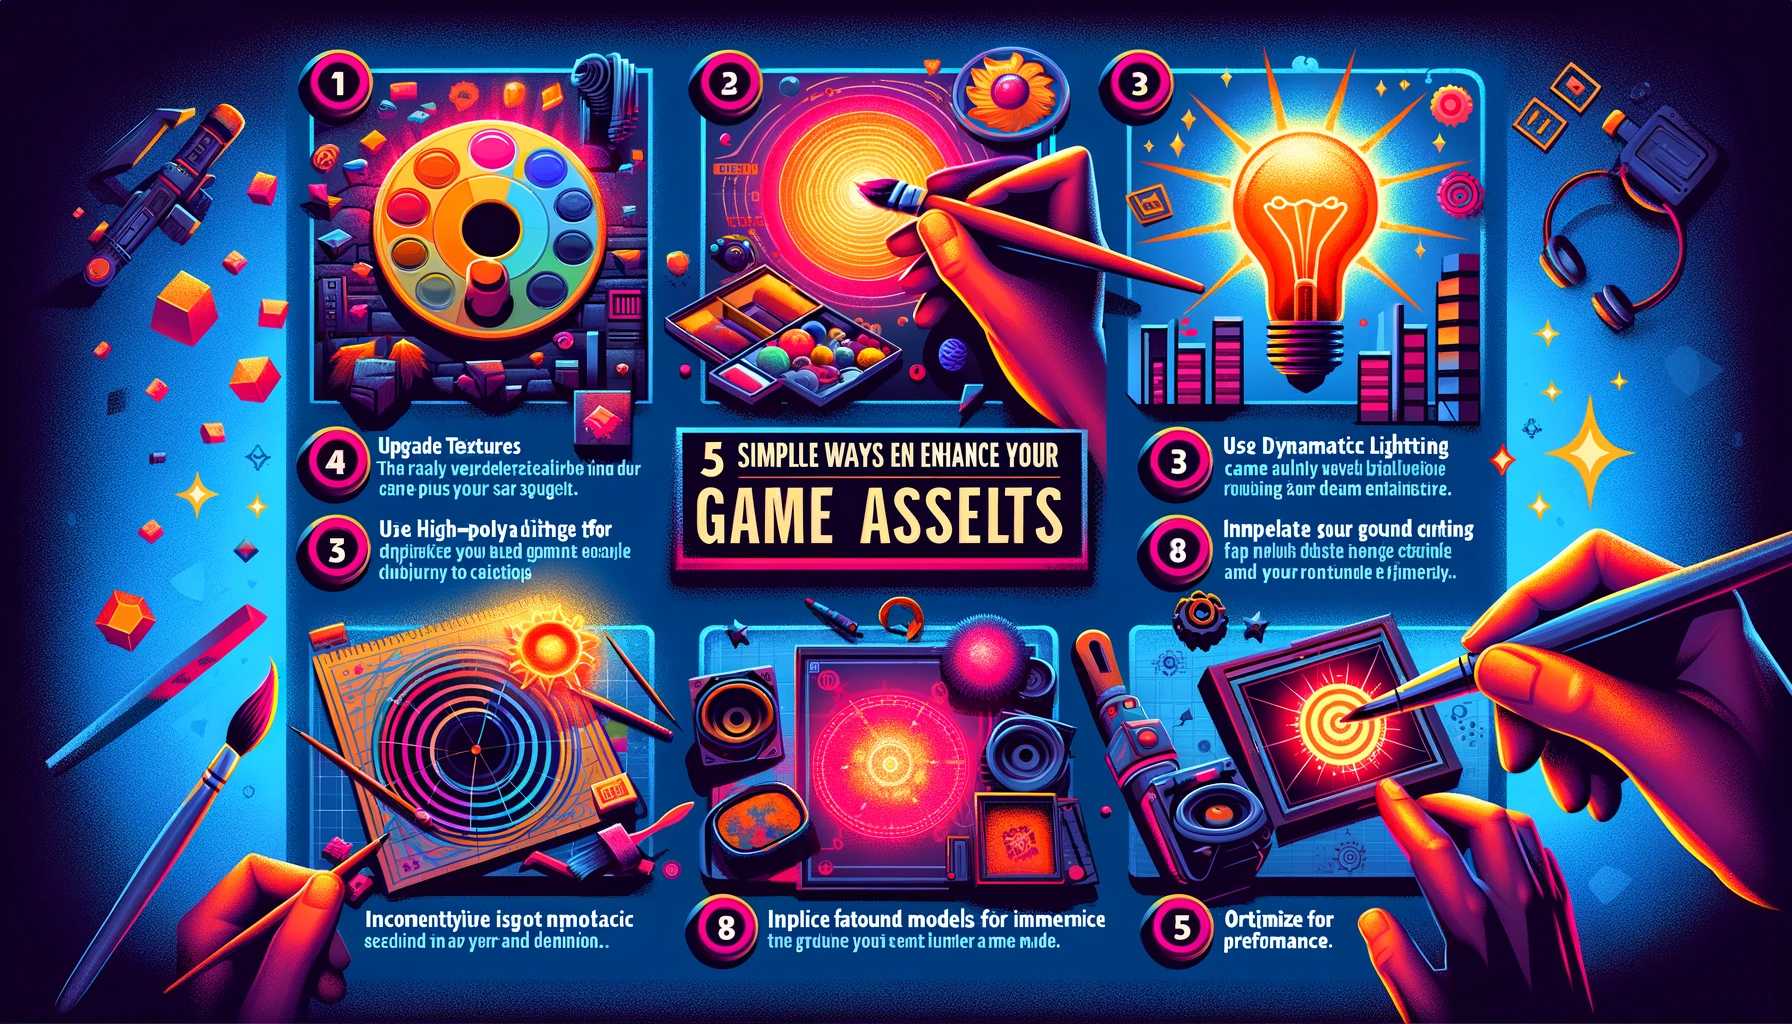 5 Simple Ways to Enhance Your Game Assets